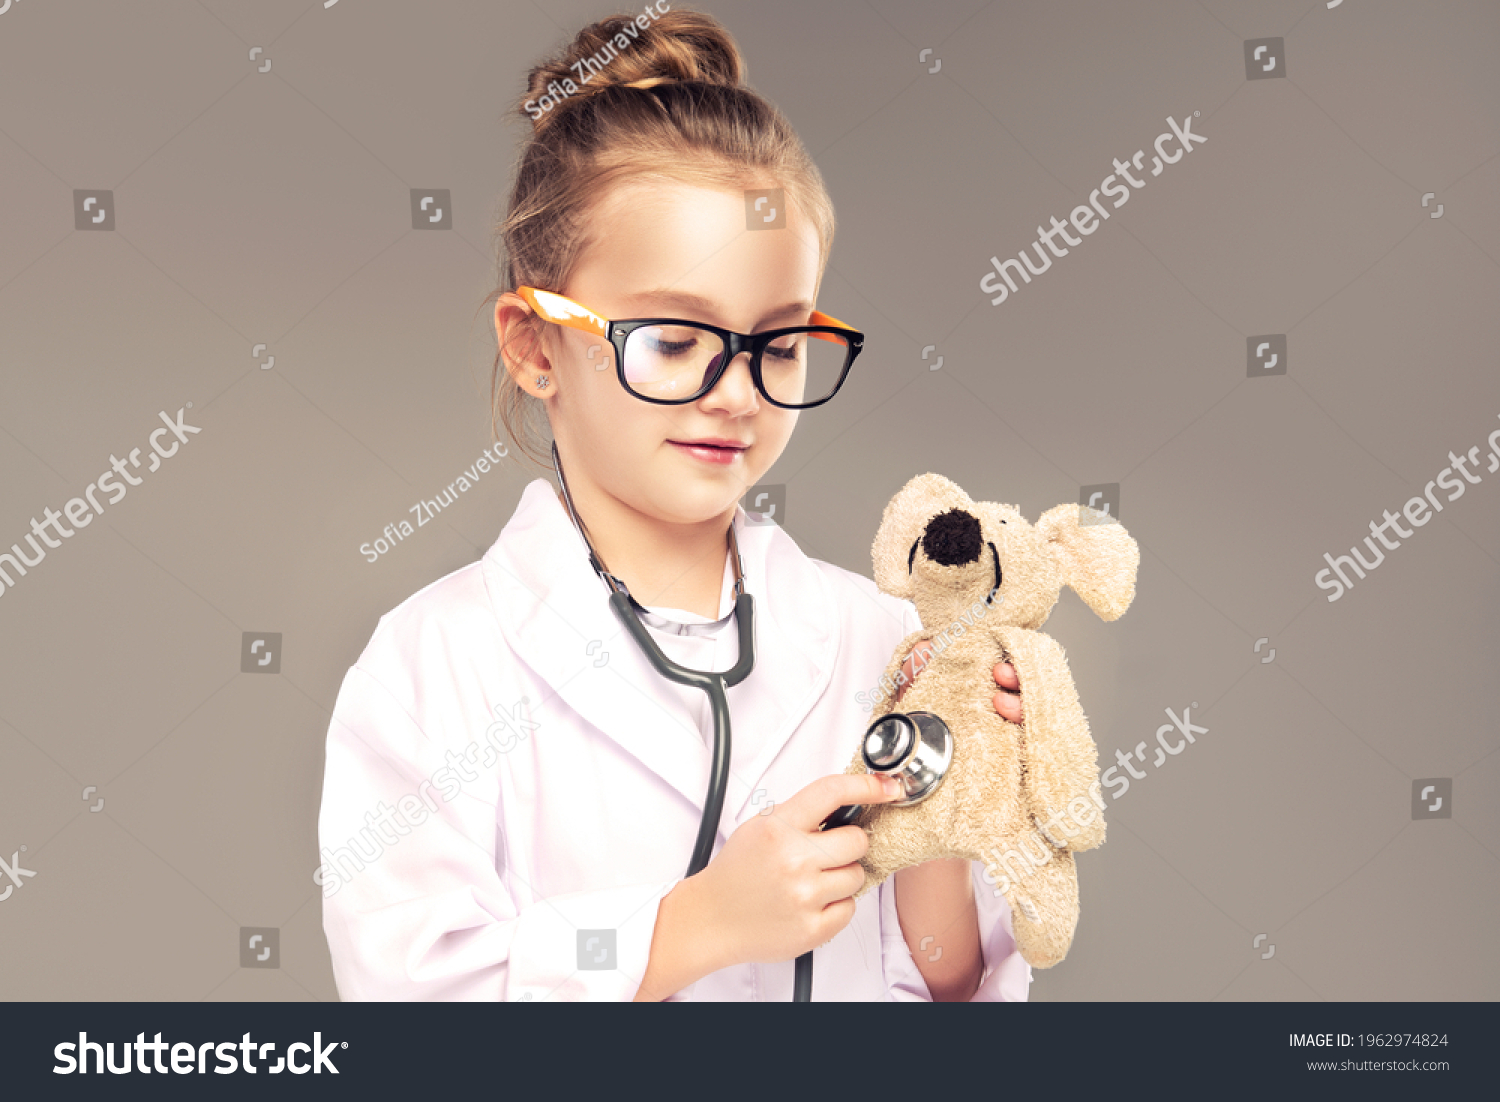 Child girl in a medical gown and stethoscope plays and pretends to be a doctor . Children choose a profession for the future. Happy and smiling baby in the game. Expressive facial emotions #1962974824